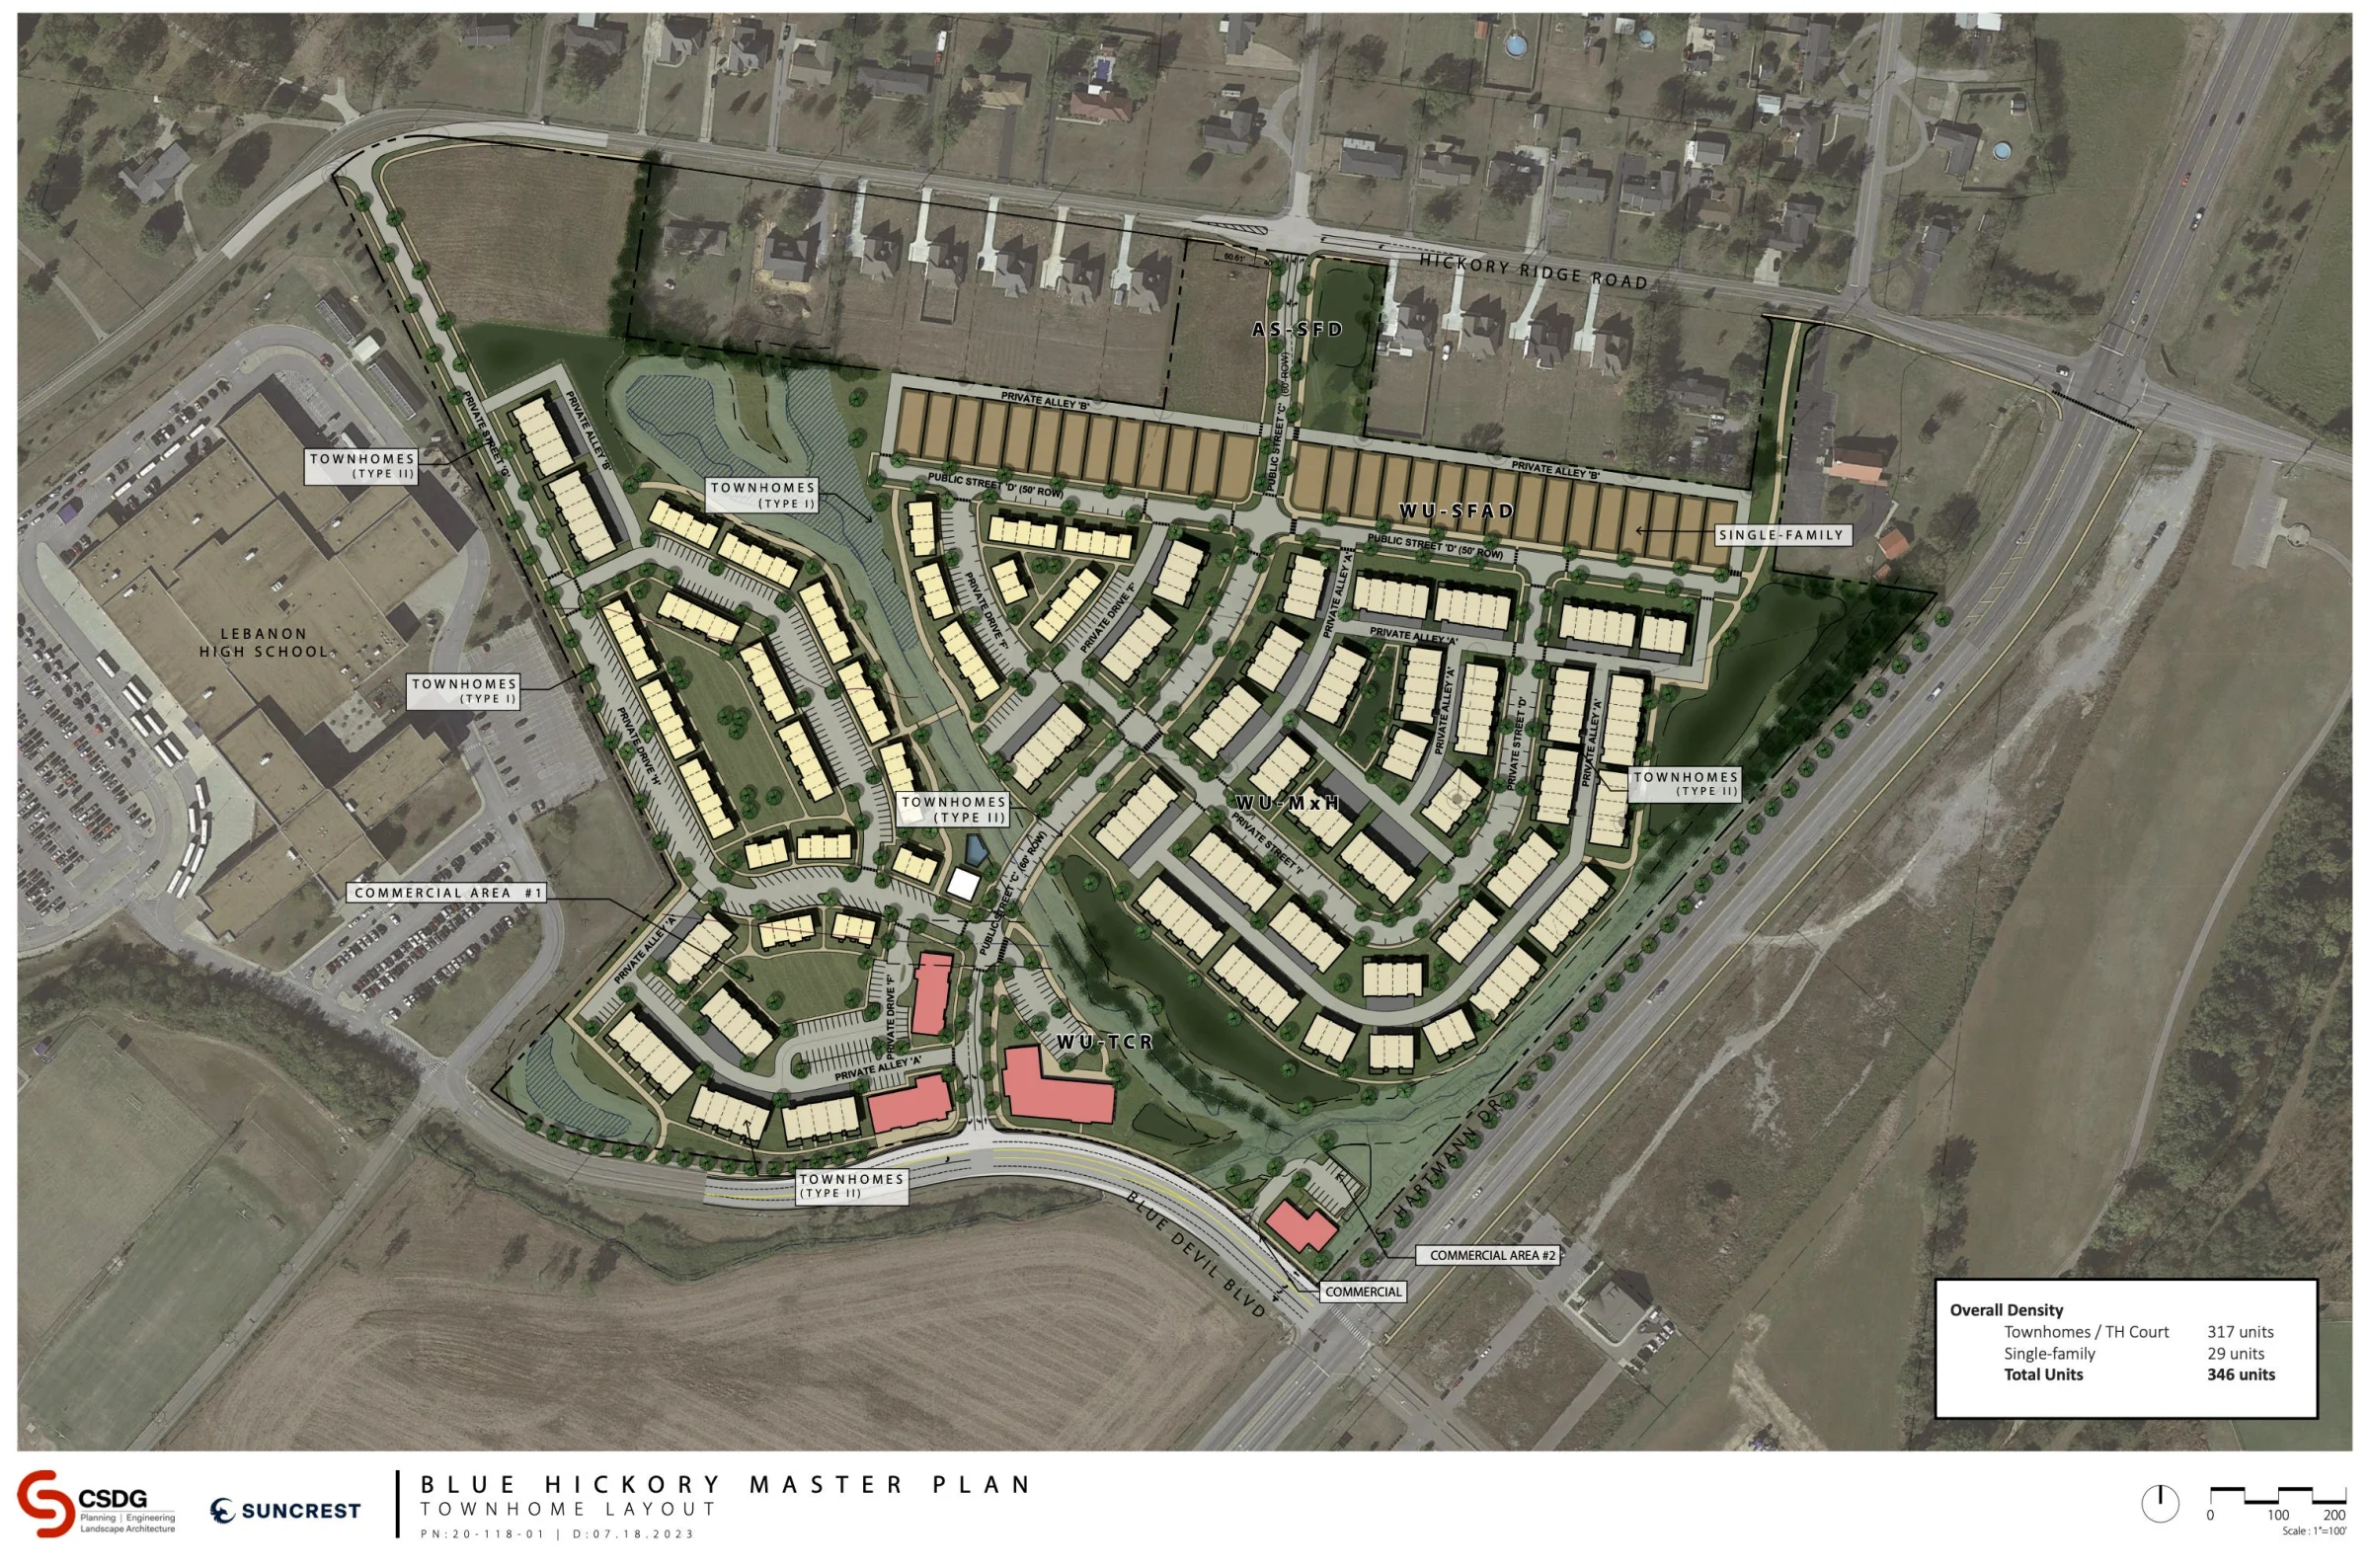 Lebanon approves Blue Hickory plan for 346 homes, 30K square feet of commercial space